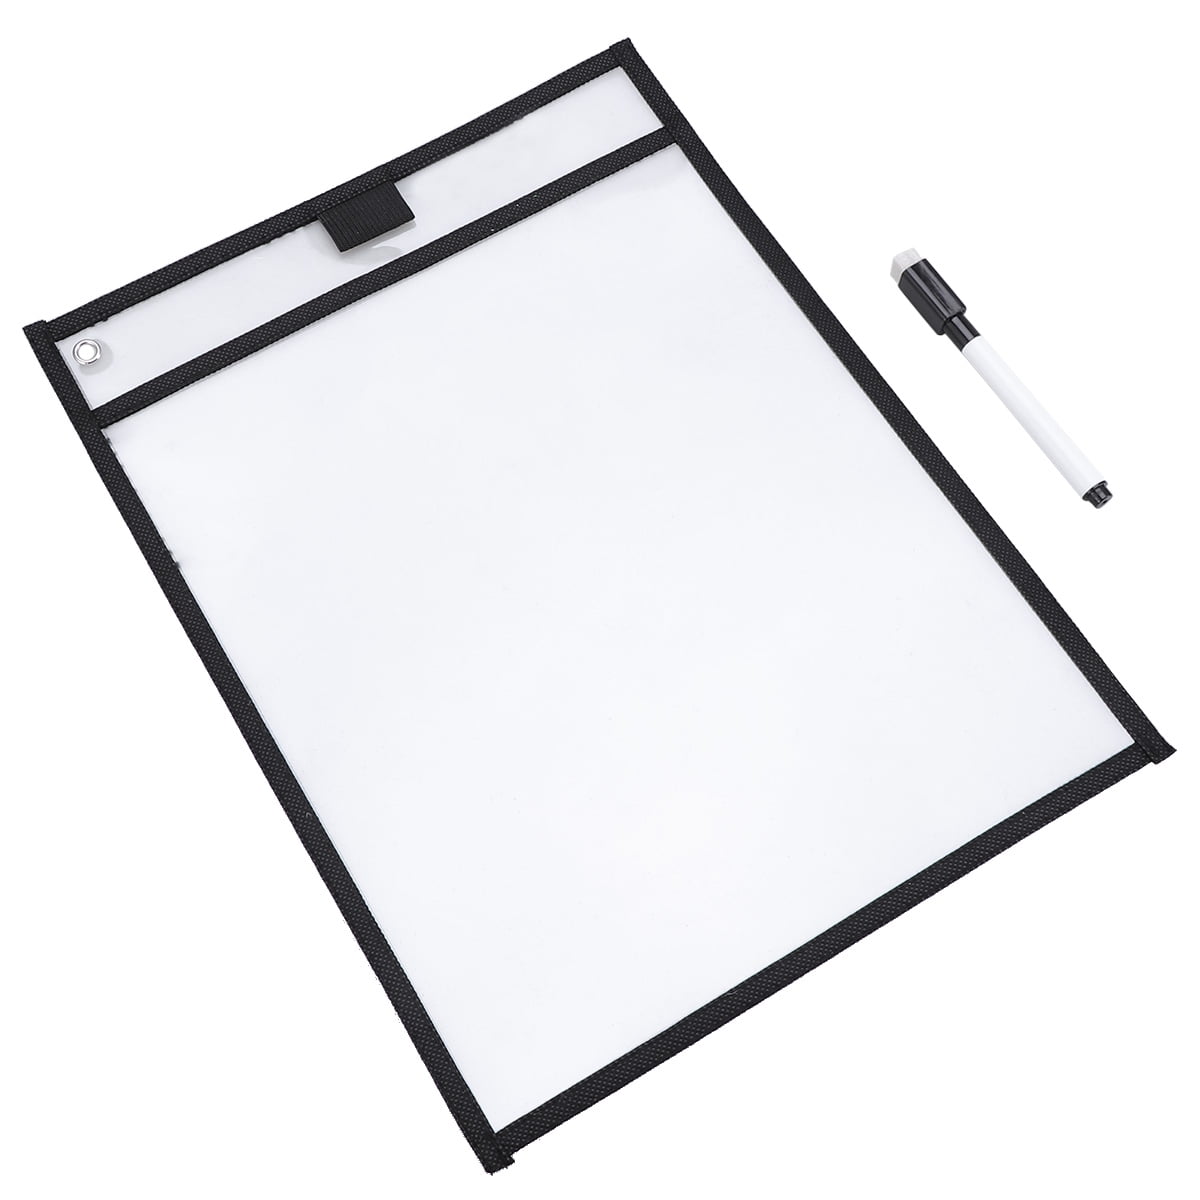 Magnetic Dry Erase Pockets by Two Point (6-Pack) - Plastic Sleeves |  Teaching Supplies | Dry Erase Sheets | Dry Erase Sleeves | School Supplies  for